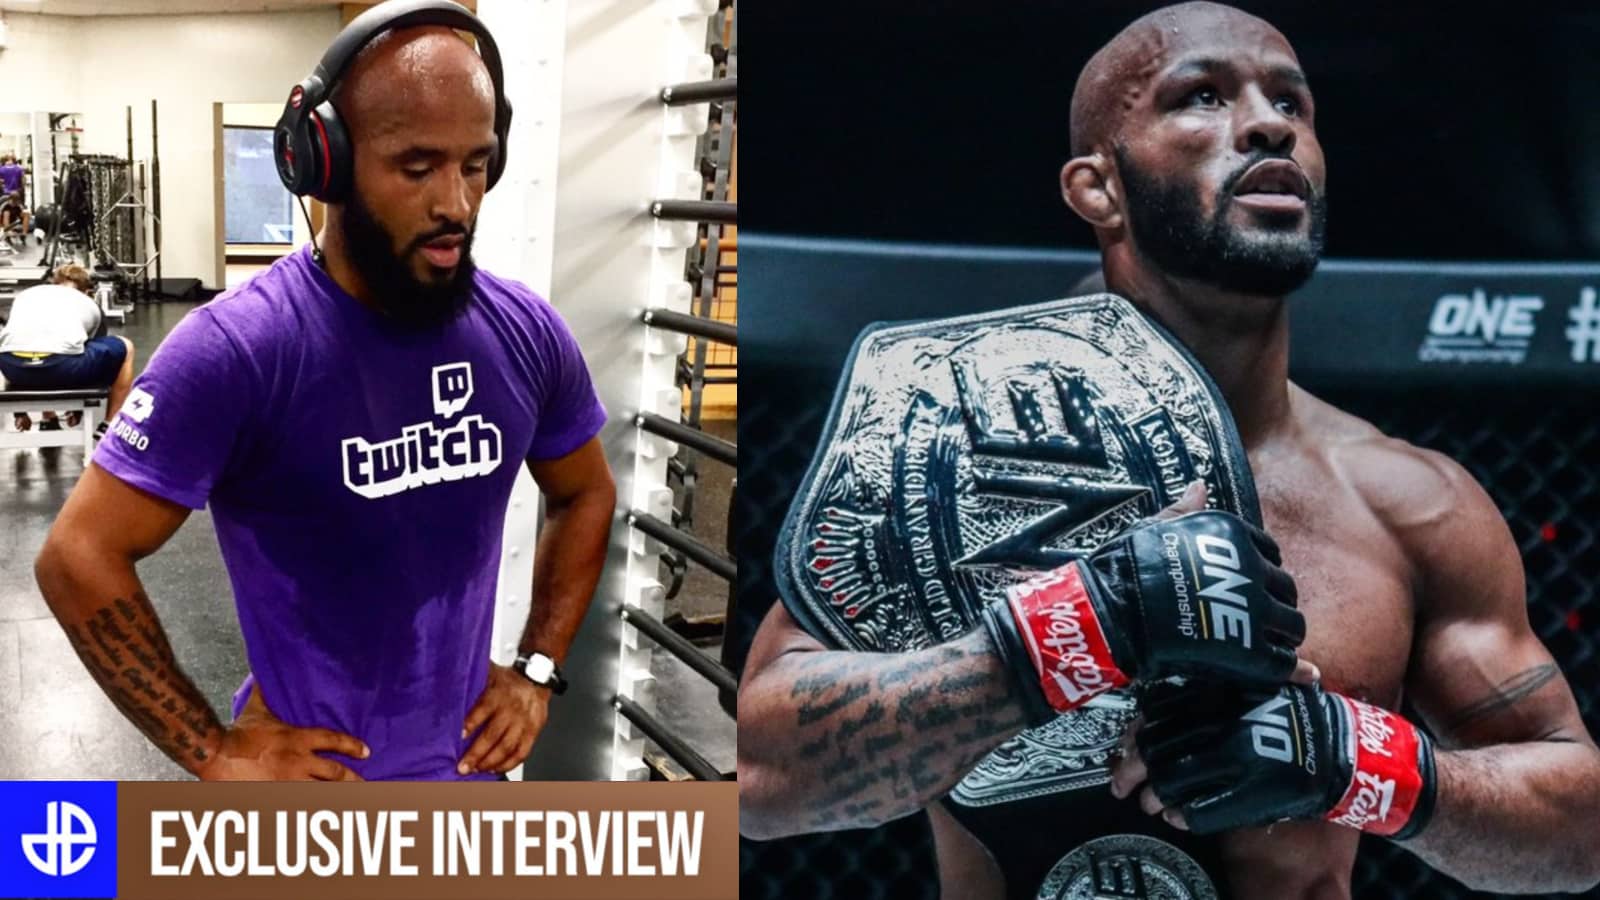 Demetrious Johnson Twitch and fight